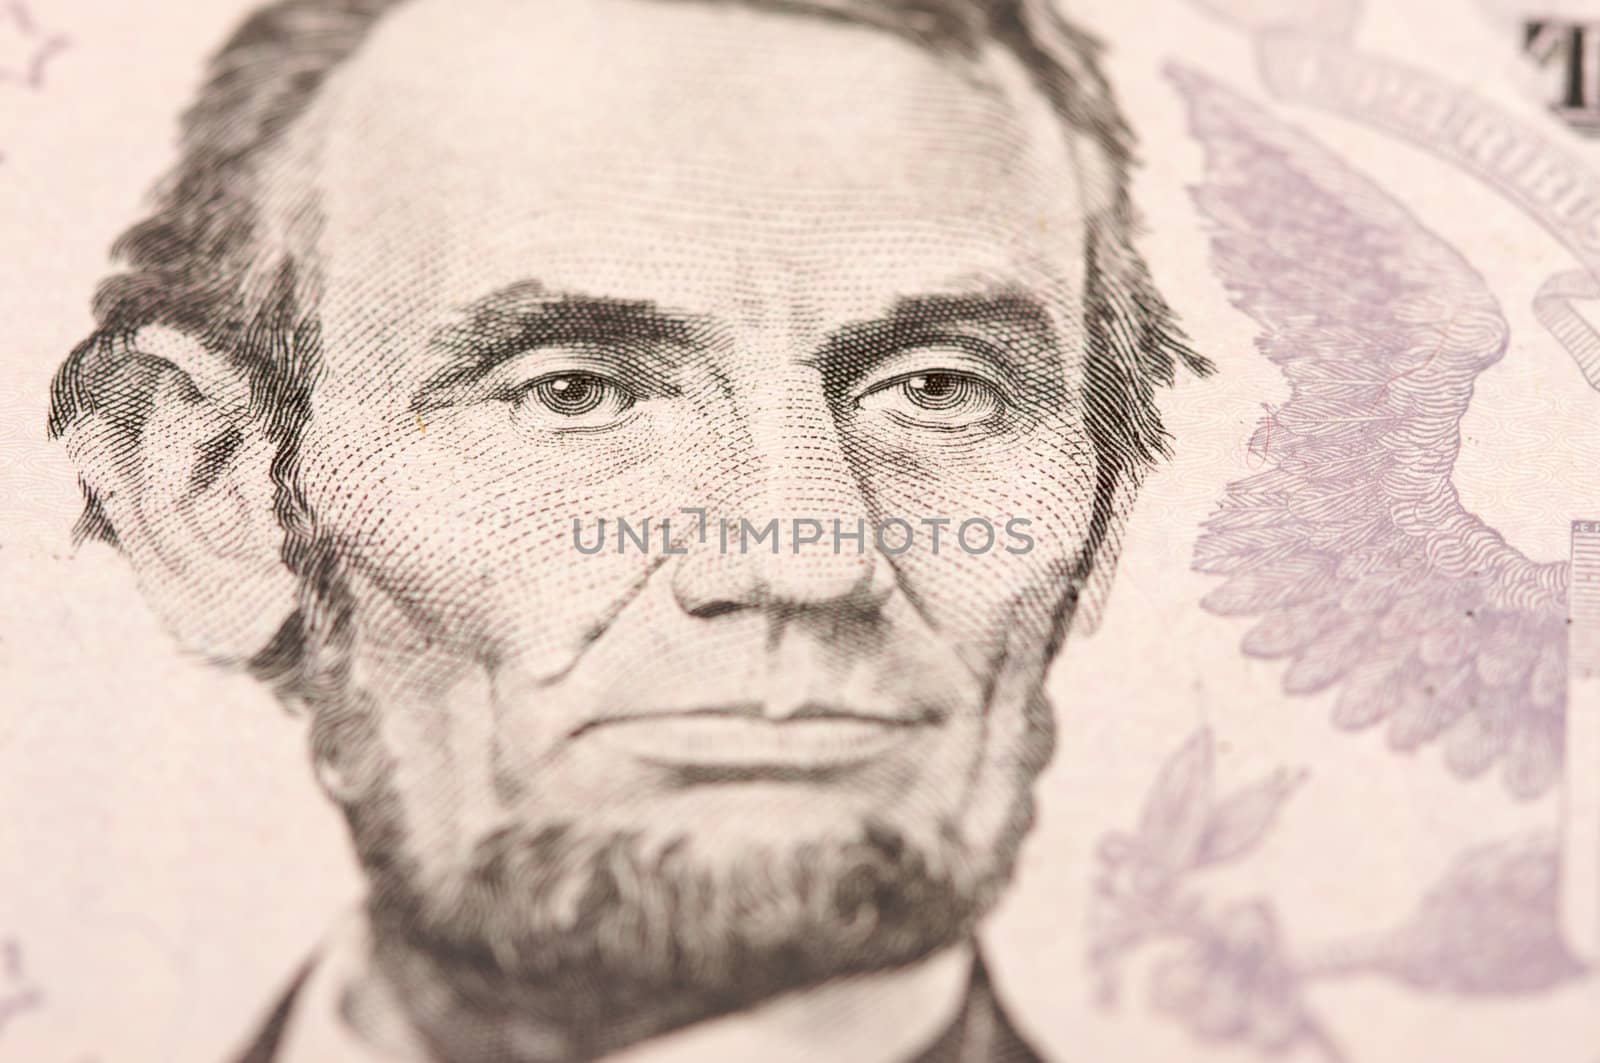 Abstract Macro of U.S. Five Dollar Bill's Abraham Lincoln face with Narrow Depth of Field.